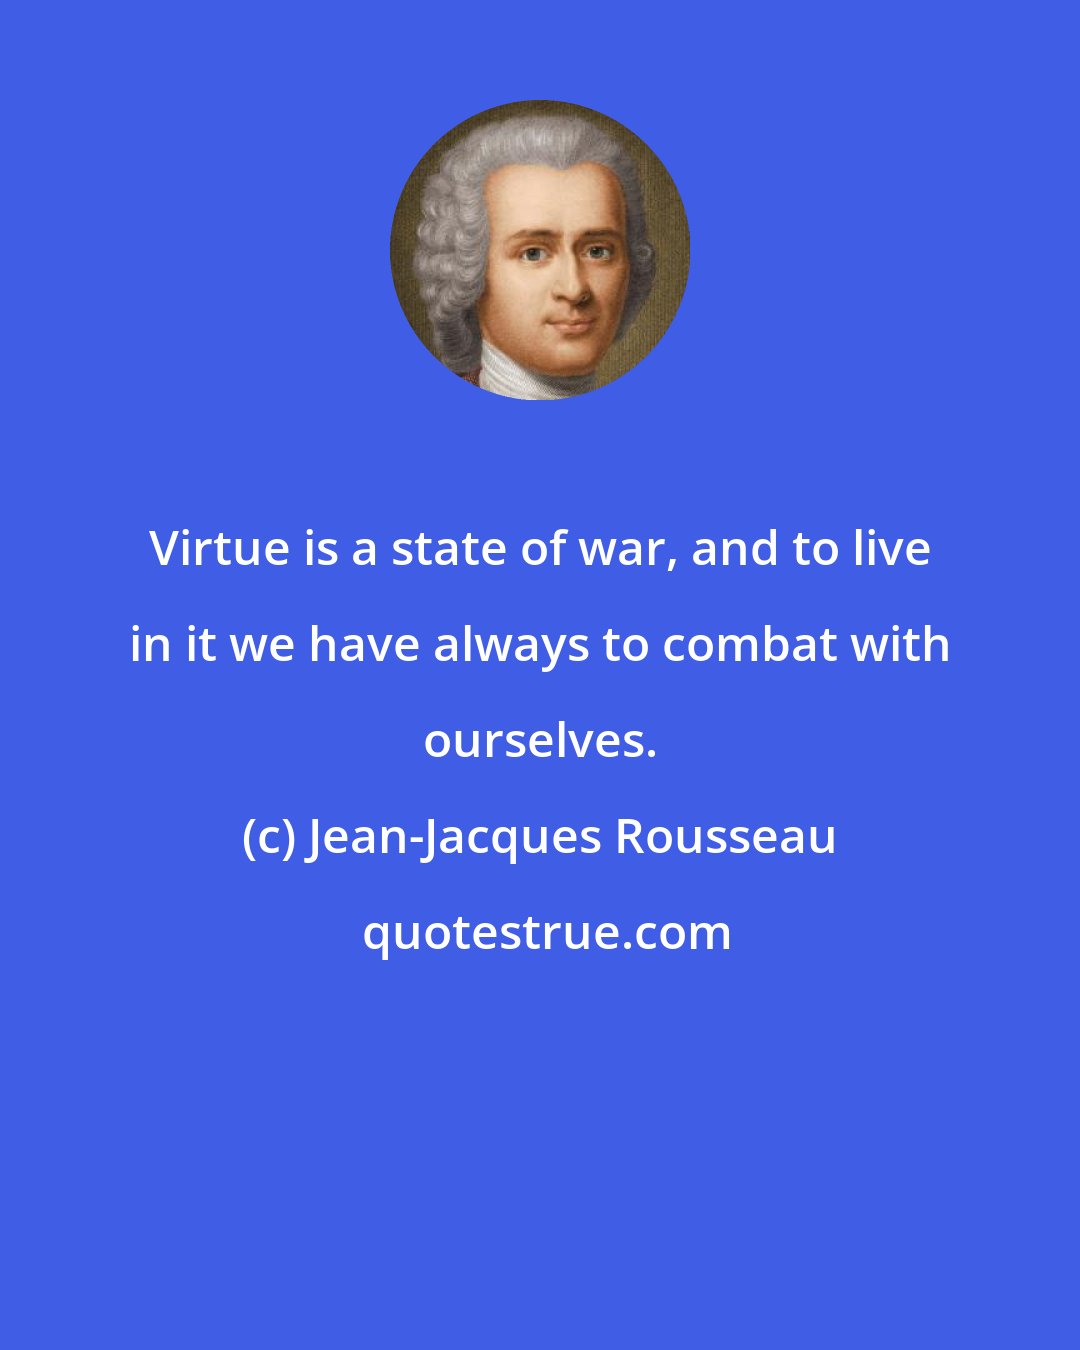 Jean-Jacques Rousseau: Virtue is a state of war, and to live in it we have always to combat with ourselves.